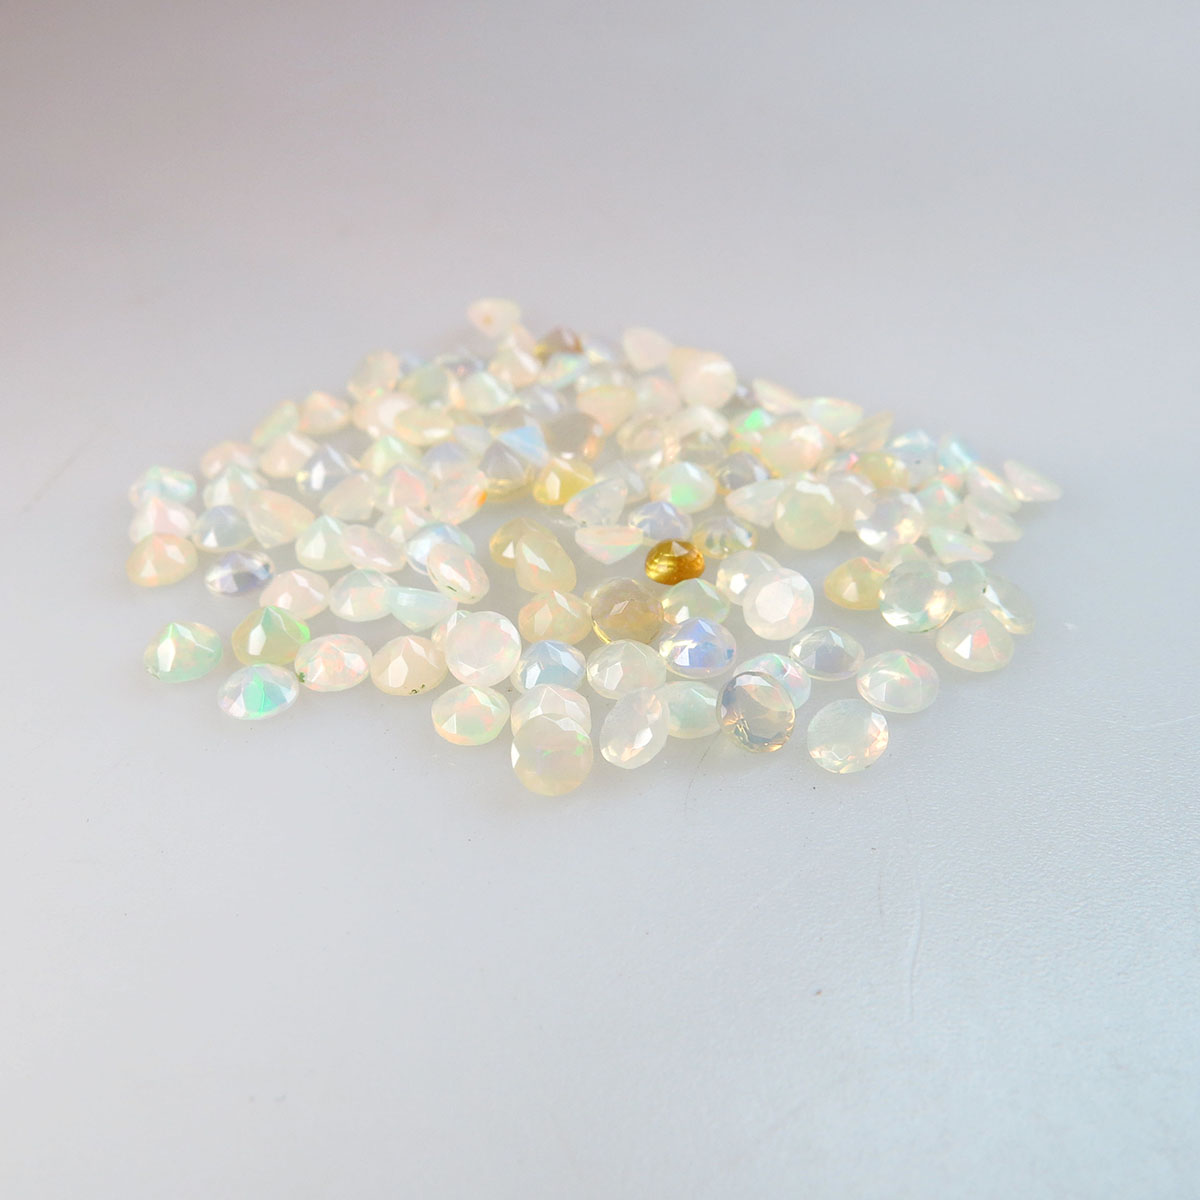 124 Round Cut Faceted Opals